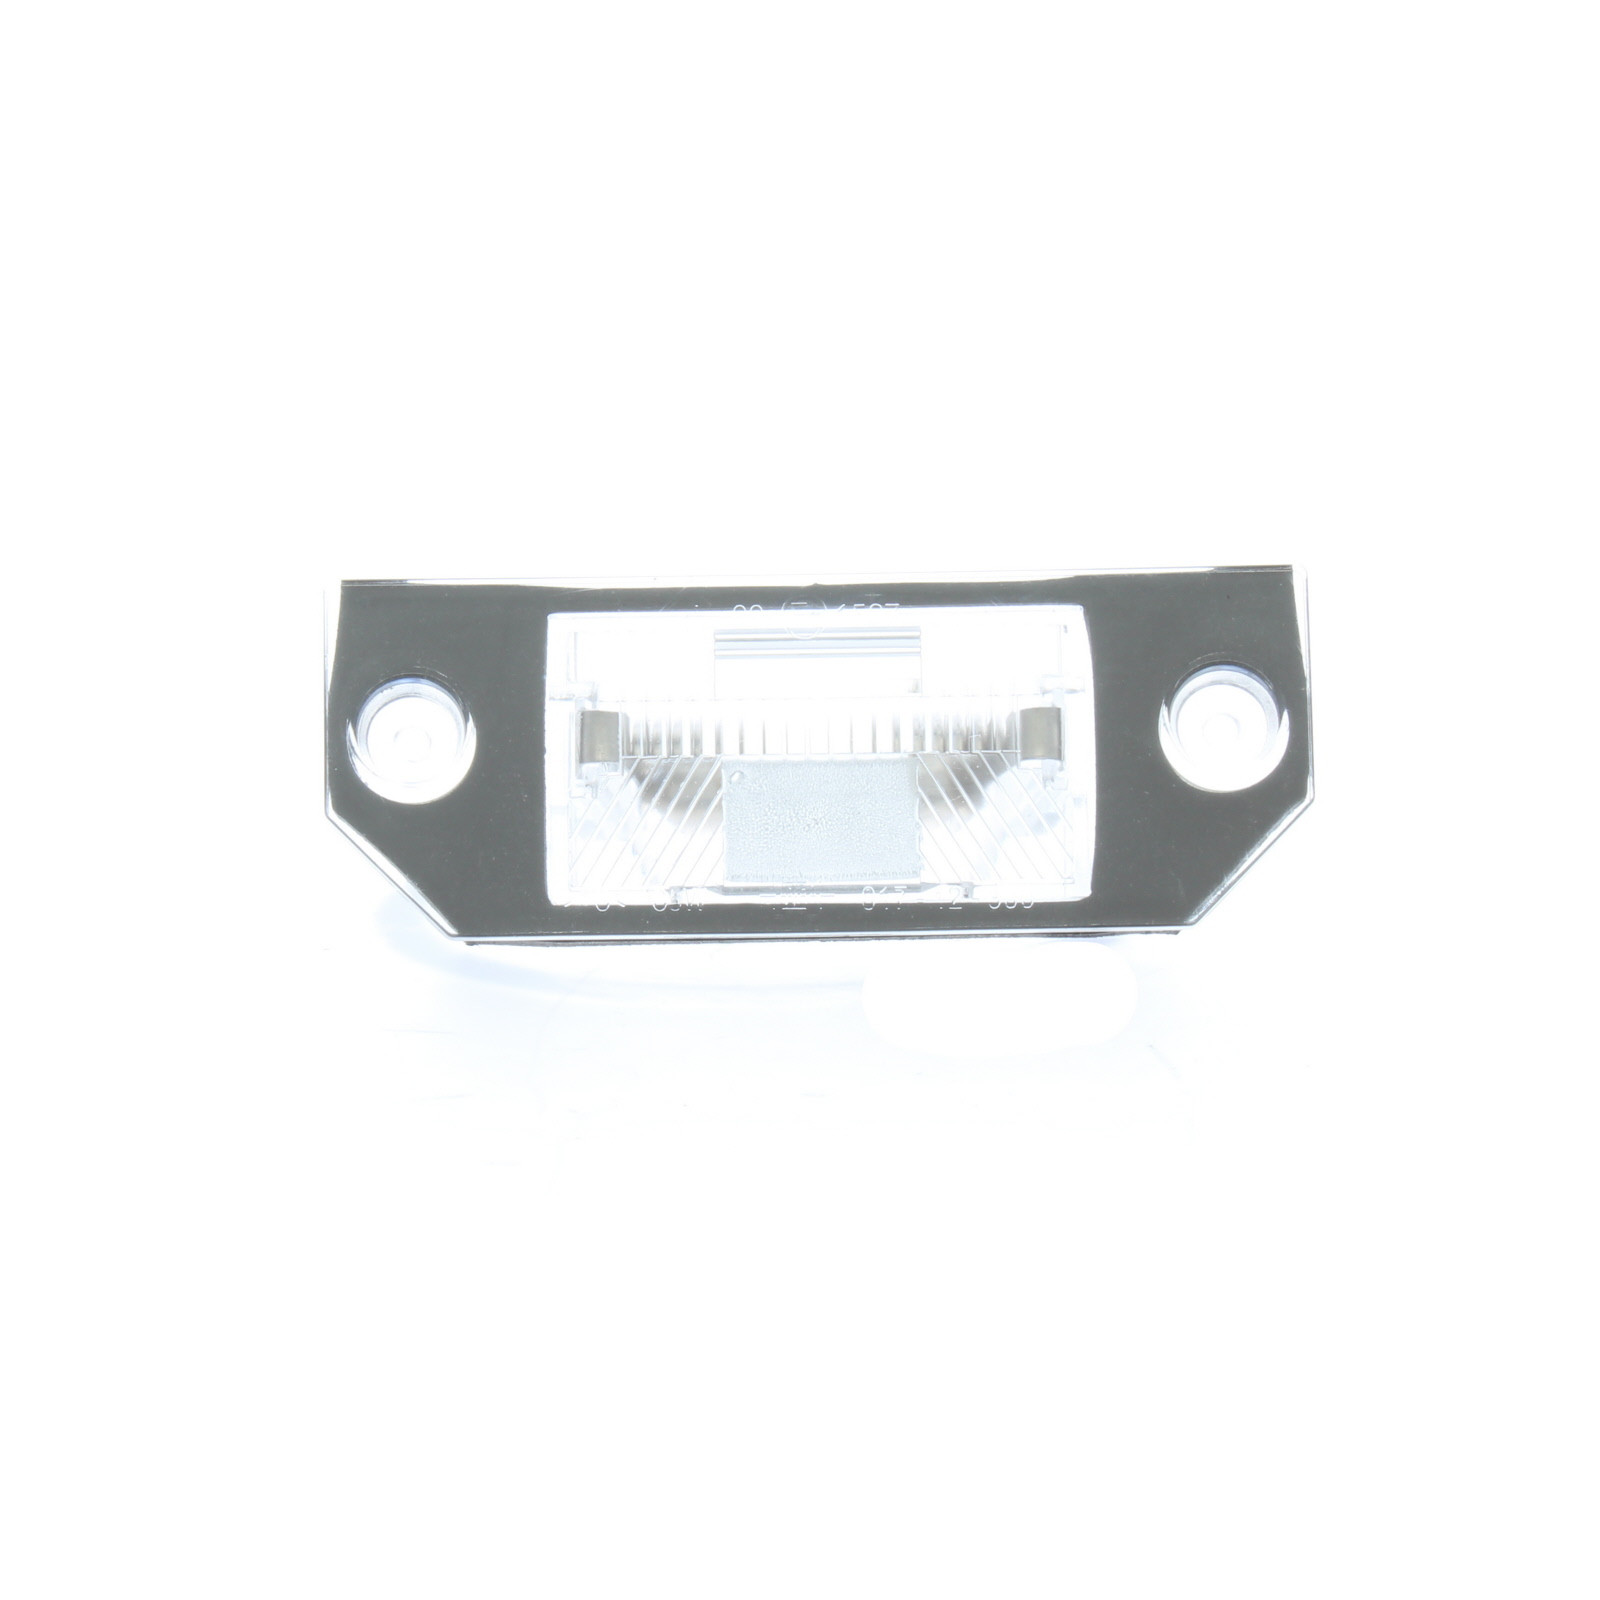 Rear Number Plate Light for Ford Focus